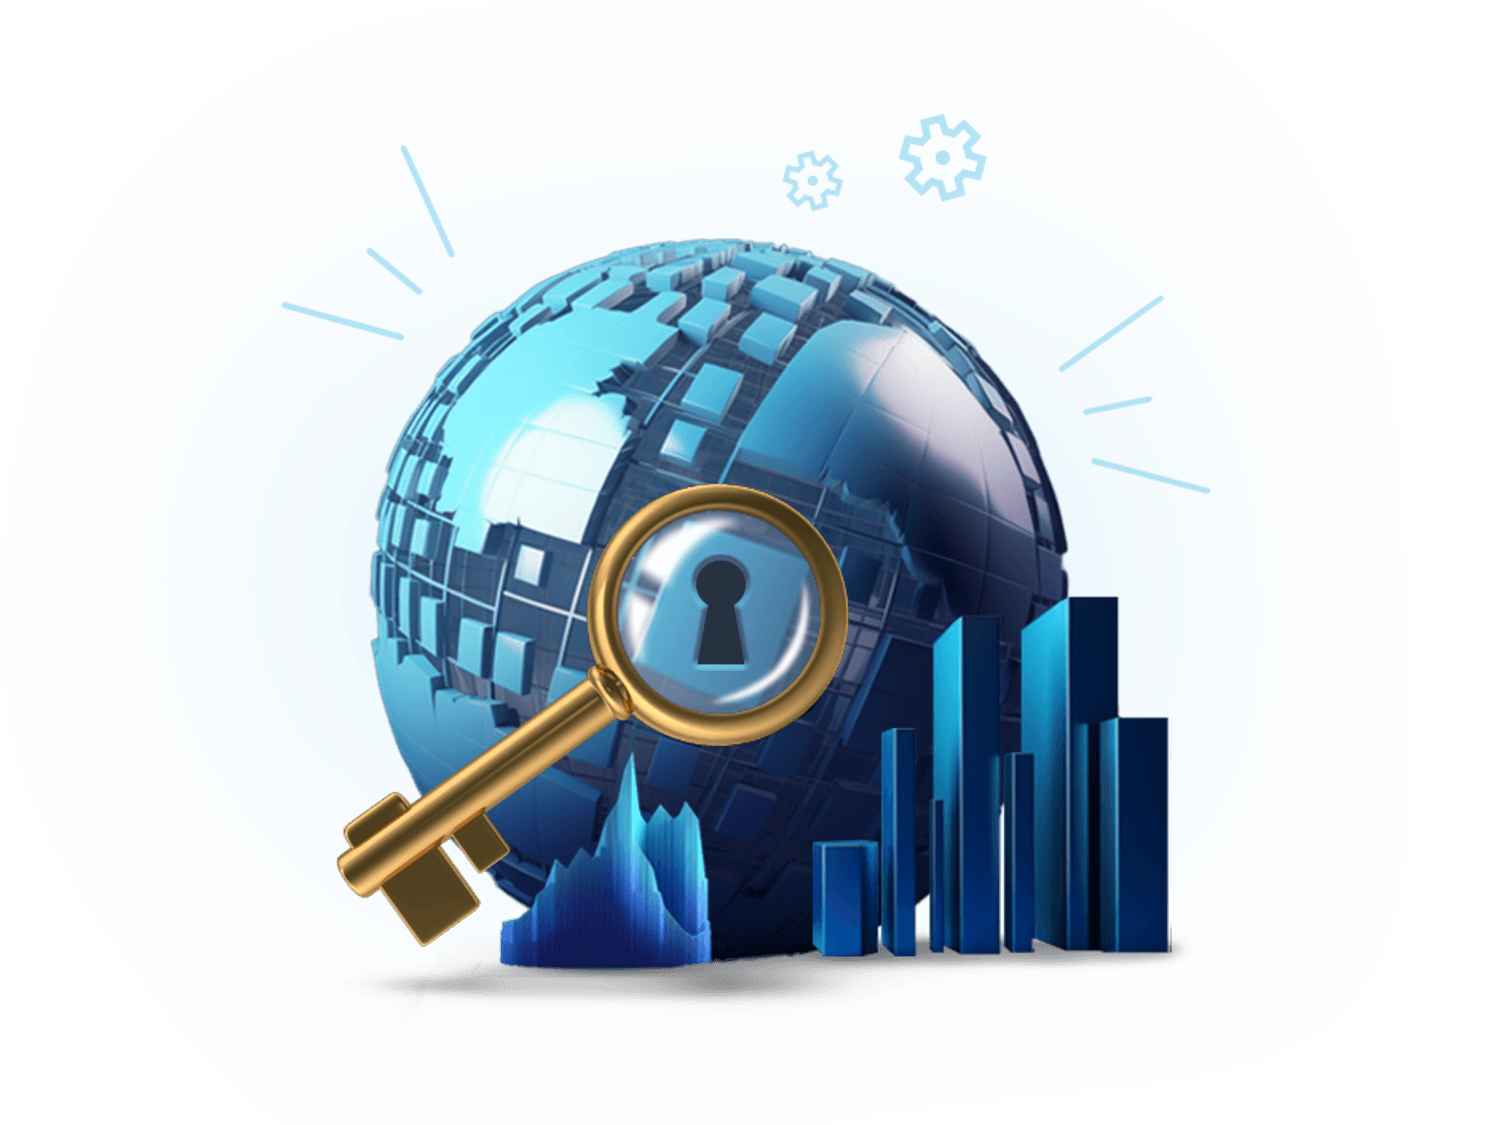 3d magnifying glass